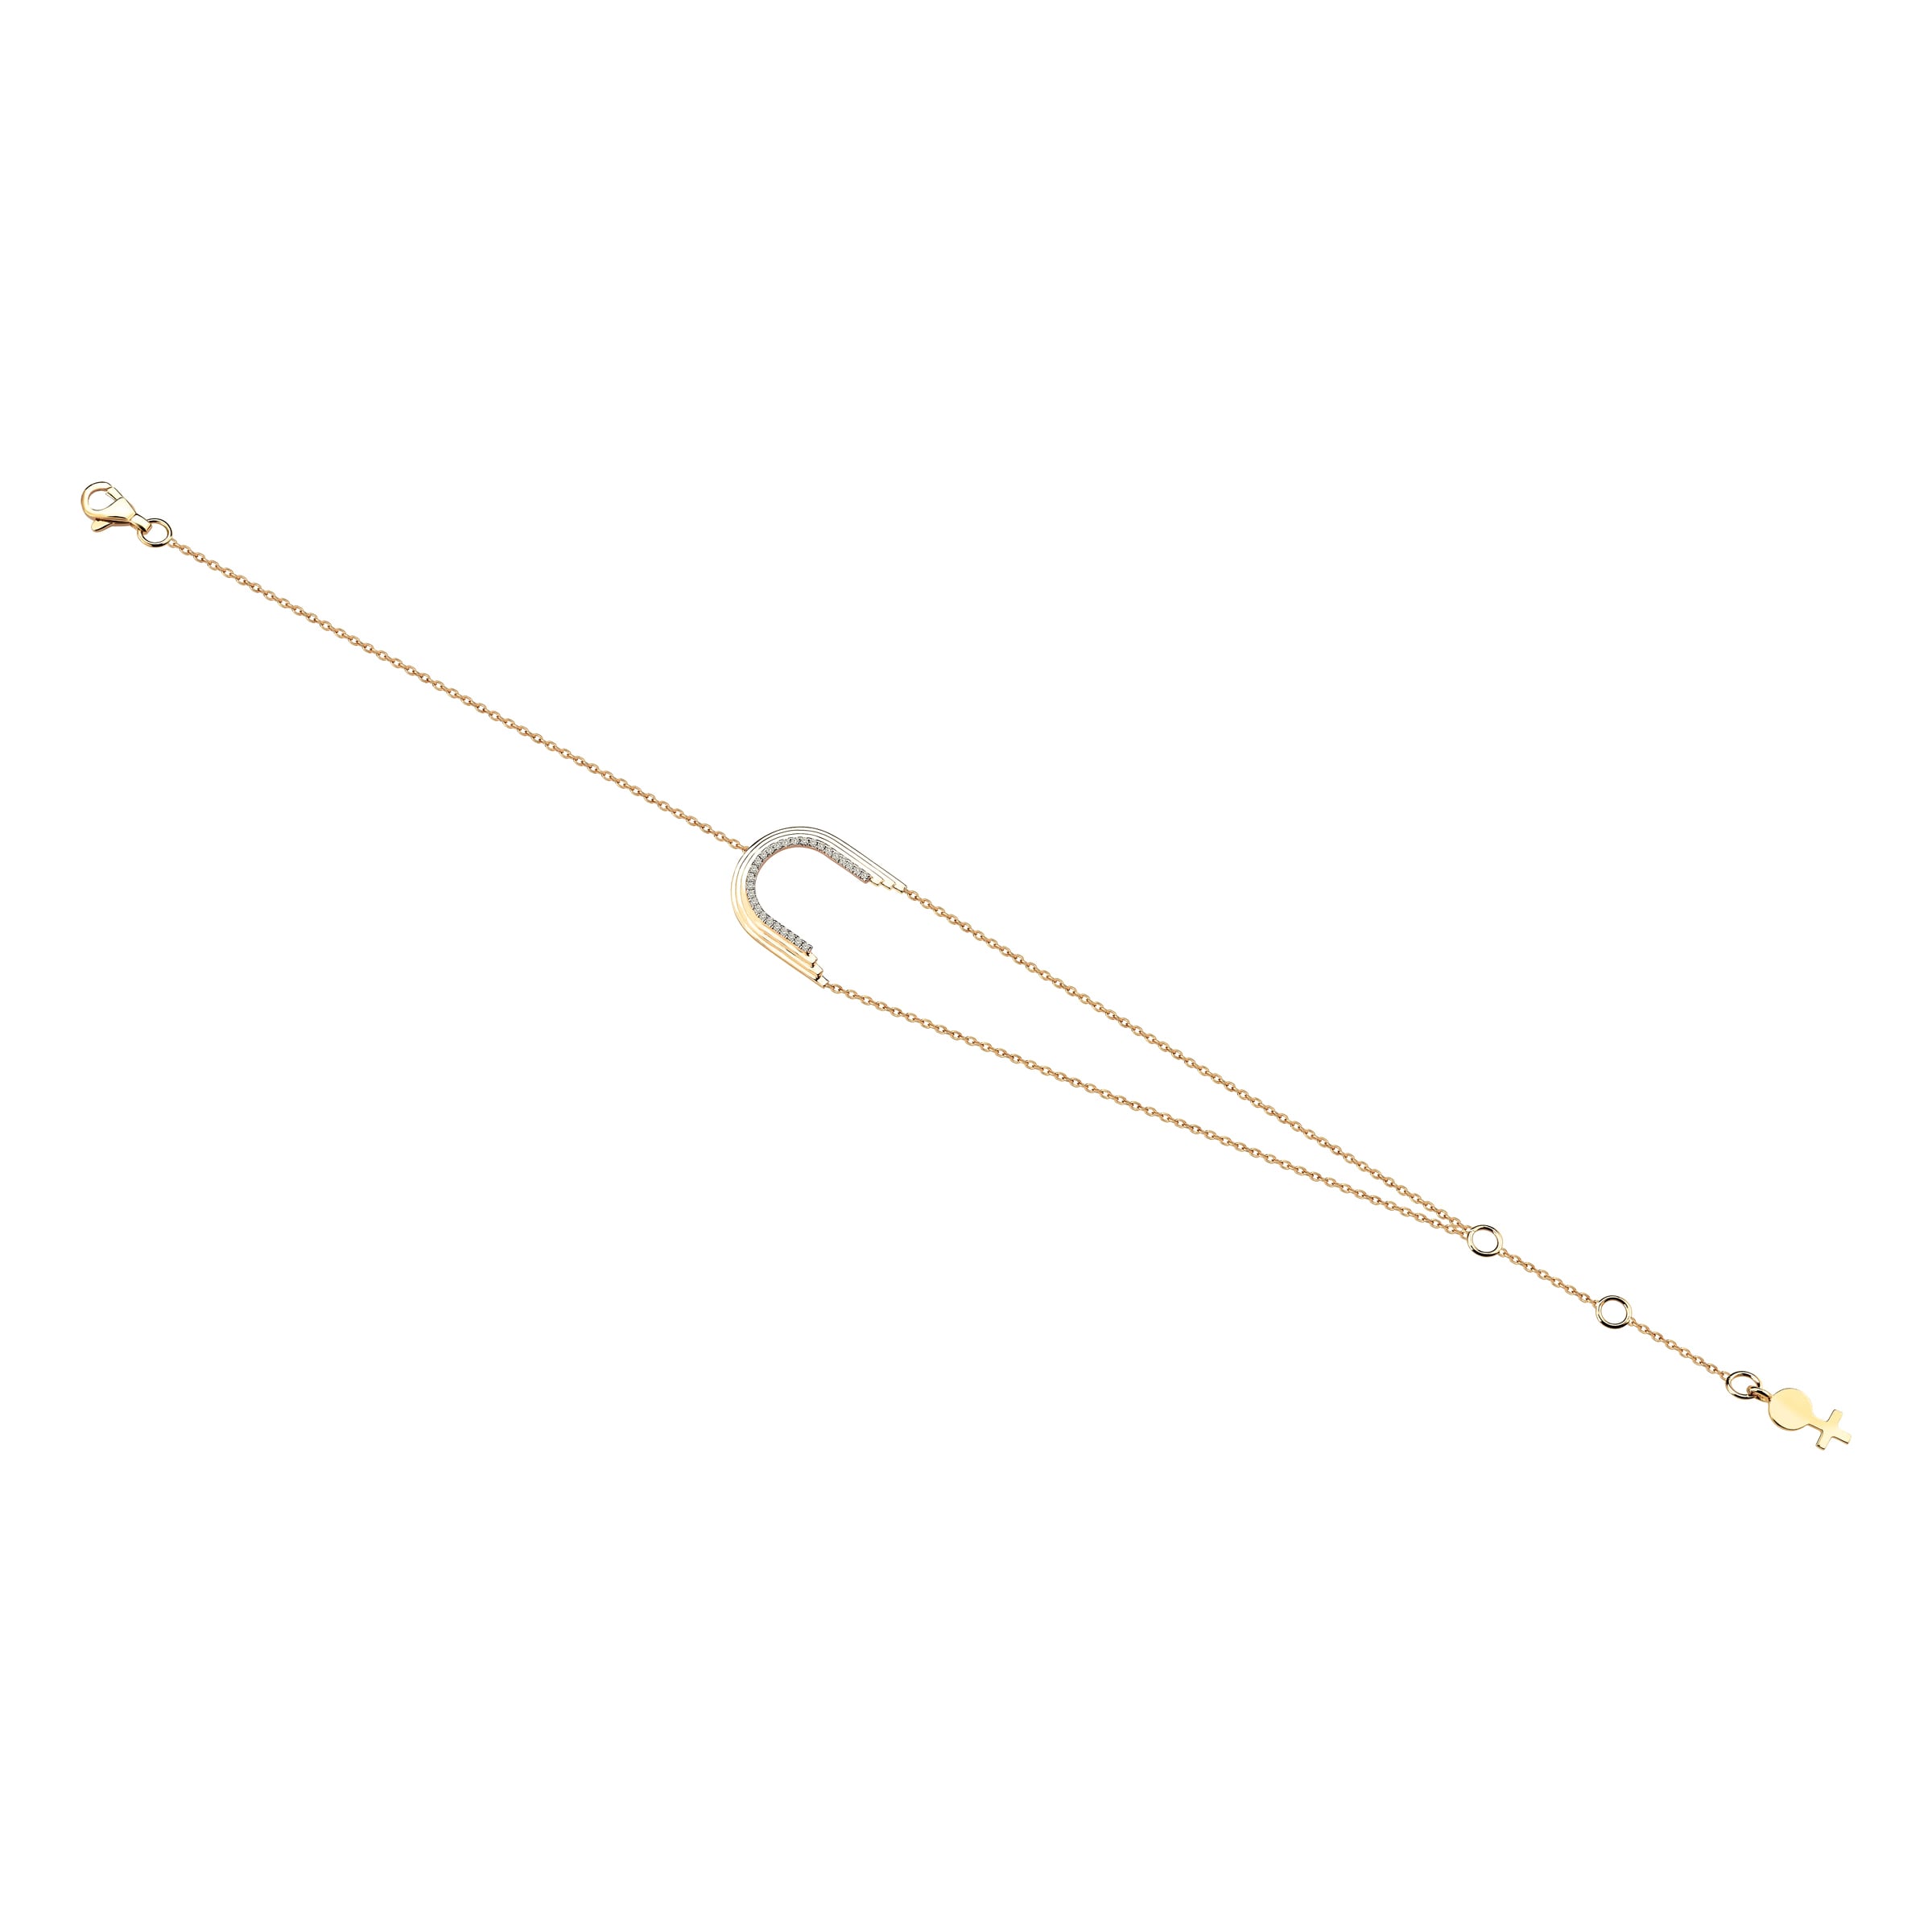 Concave Arch Bracelet in Yellow Gold - Her Story Shop